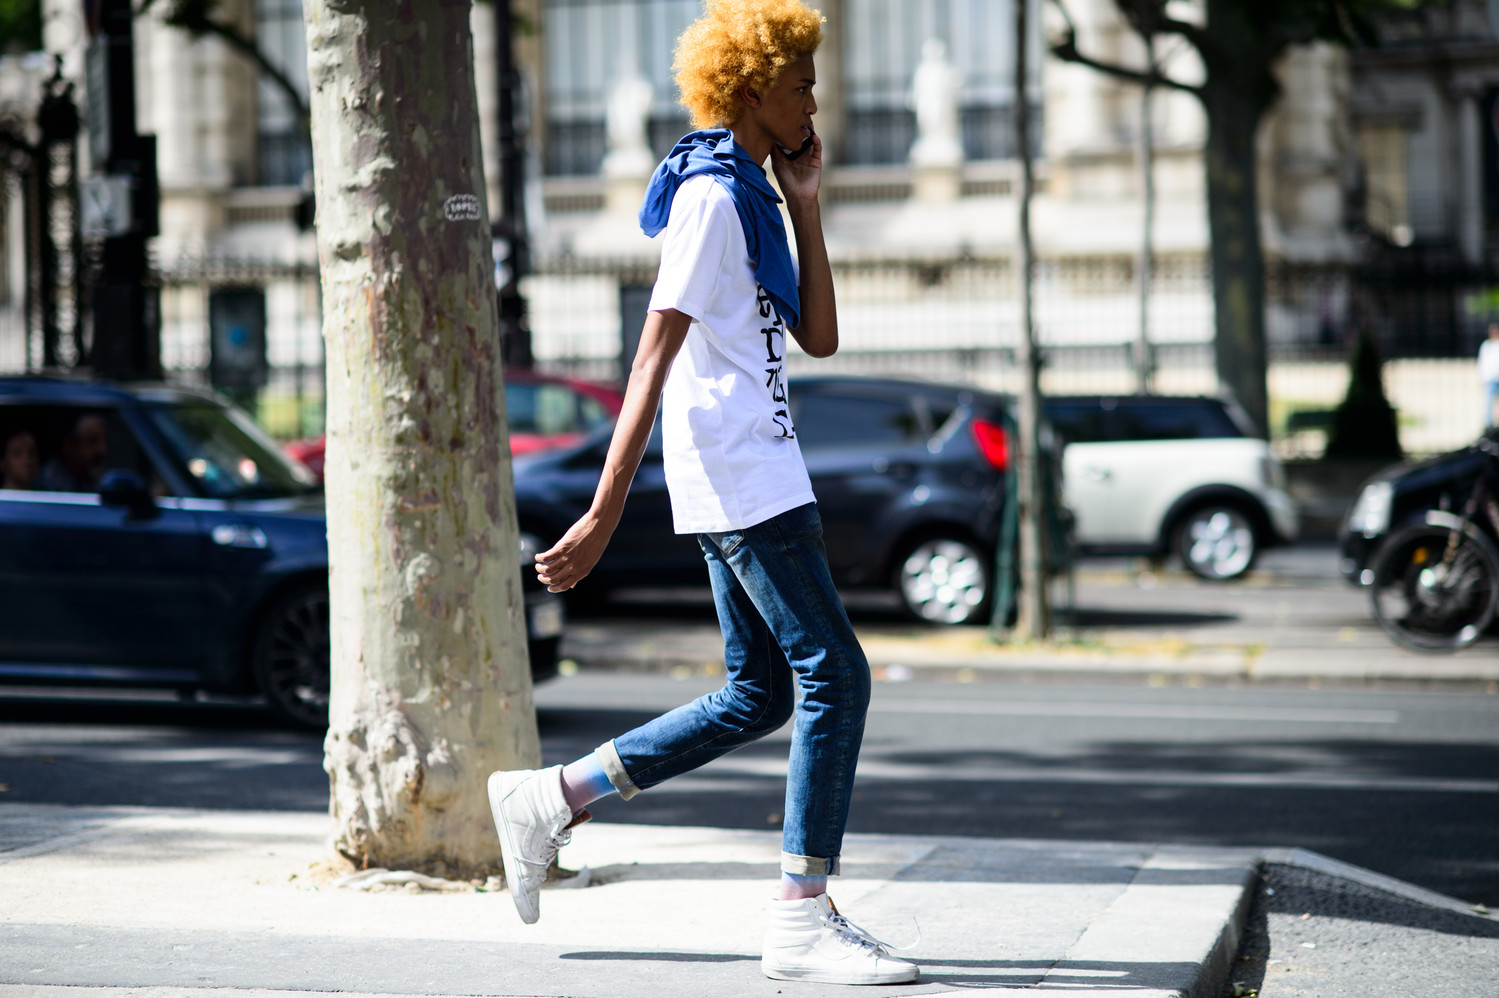 Lyst - How to Style Your High-Top Sneakers